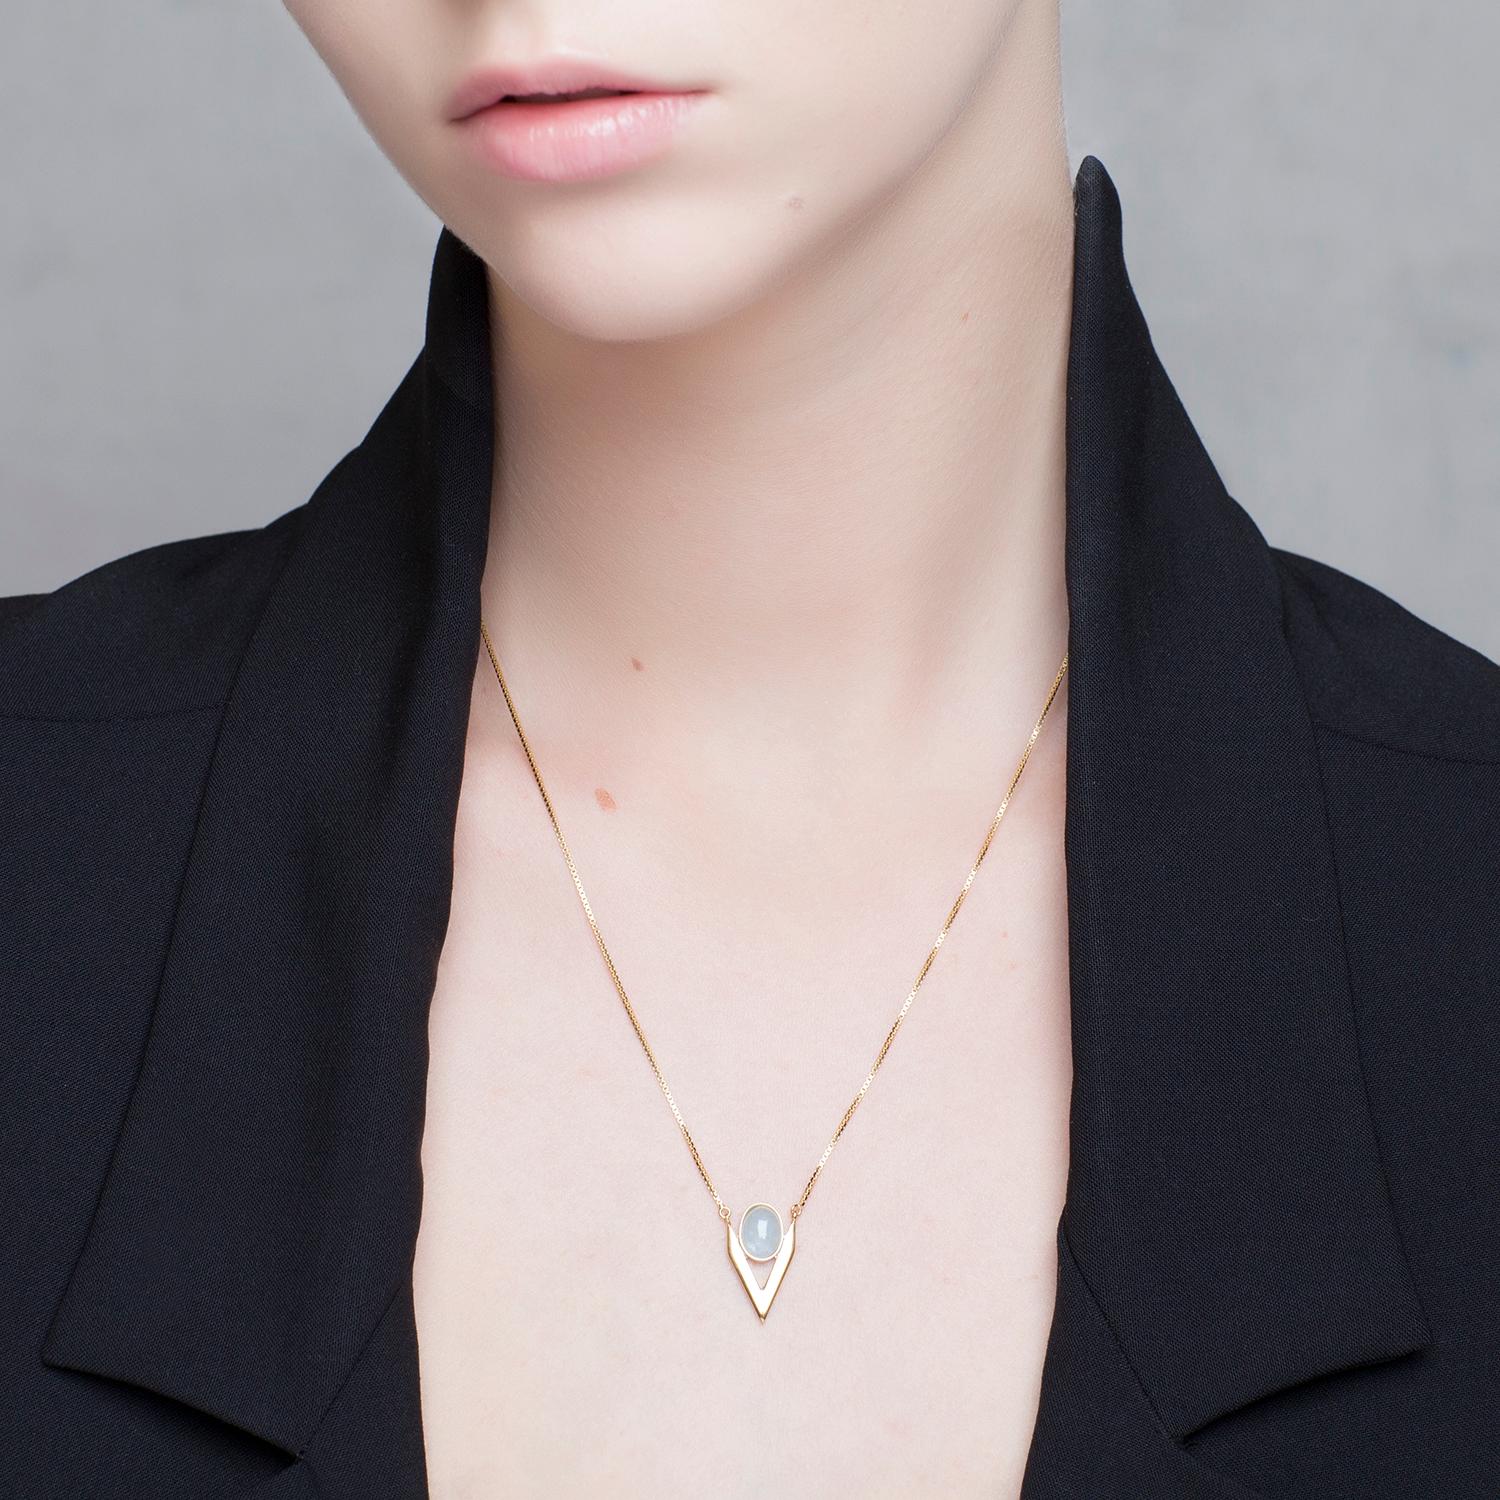 Iosselliani jewellery pieces are intended to be the new classic with an edgy style. Designed with a 9 Karat gold chain, the necklace features an aquamarine cabochon framed into a V shape. Bringing geometry to your look this piece will allow you to